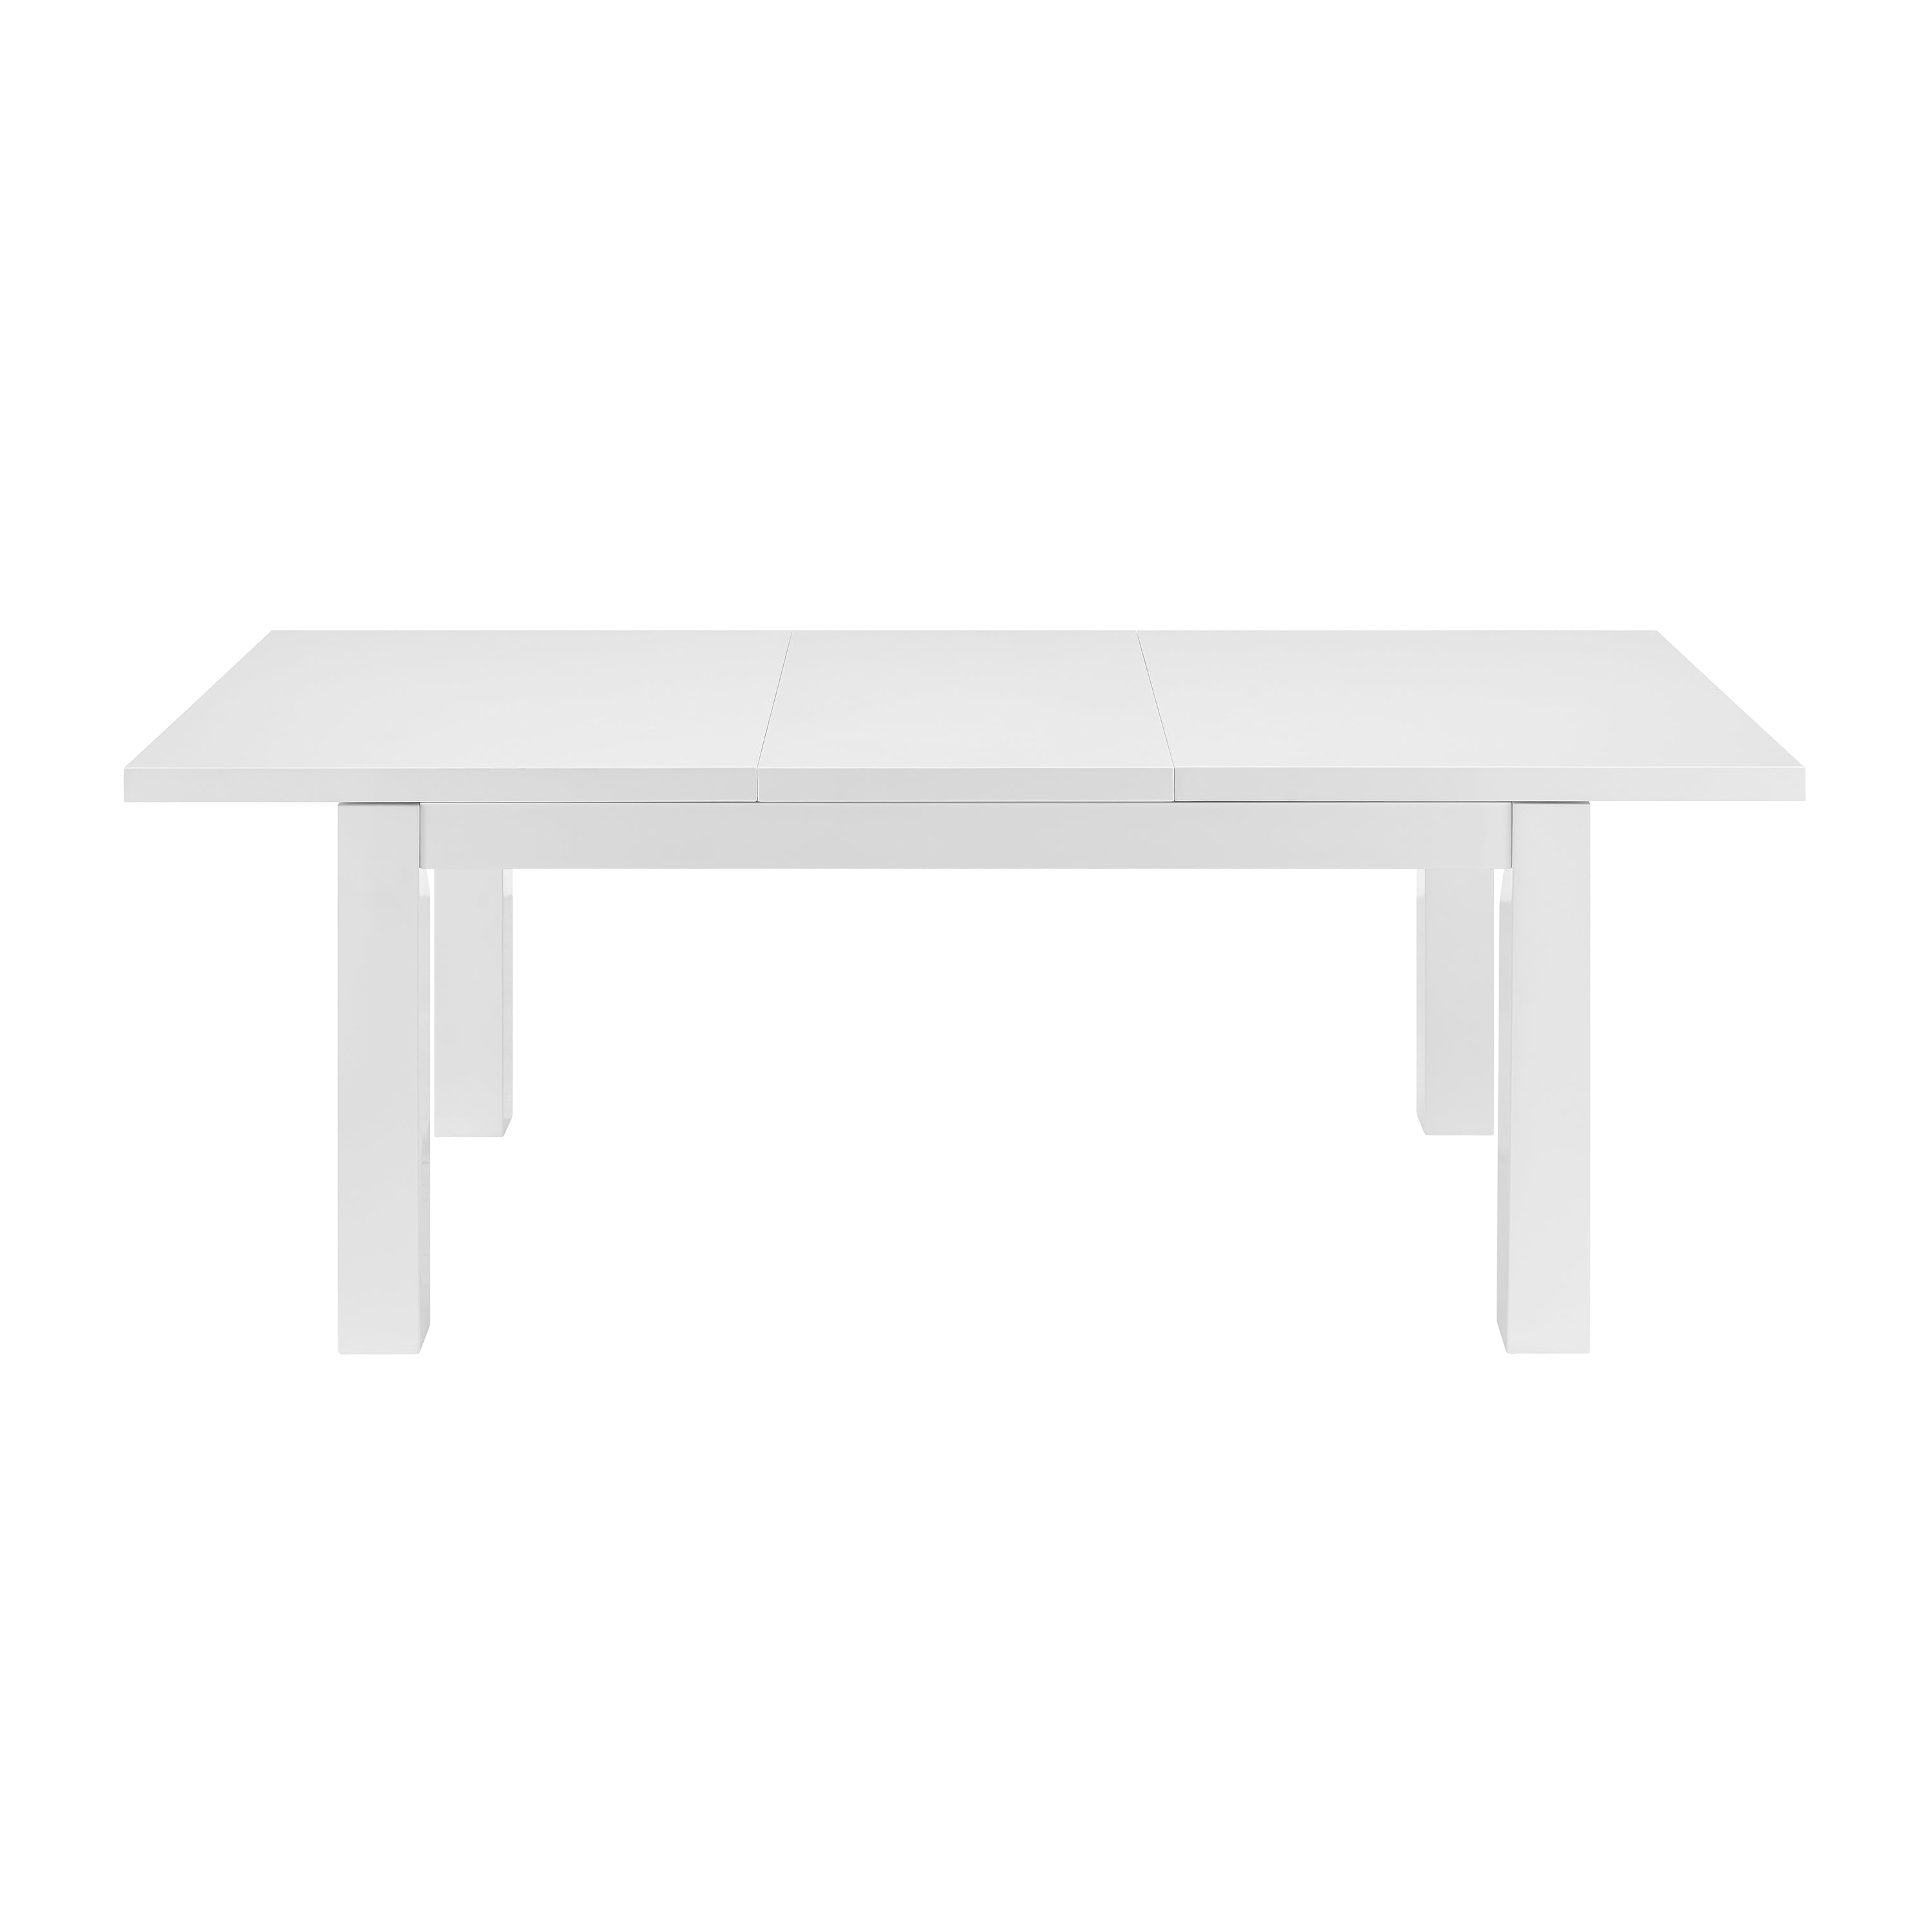 Euro Style Dining Tables - Tresero 80" Extension Table Top in High Gloss White